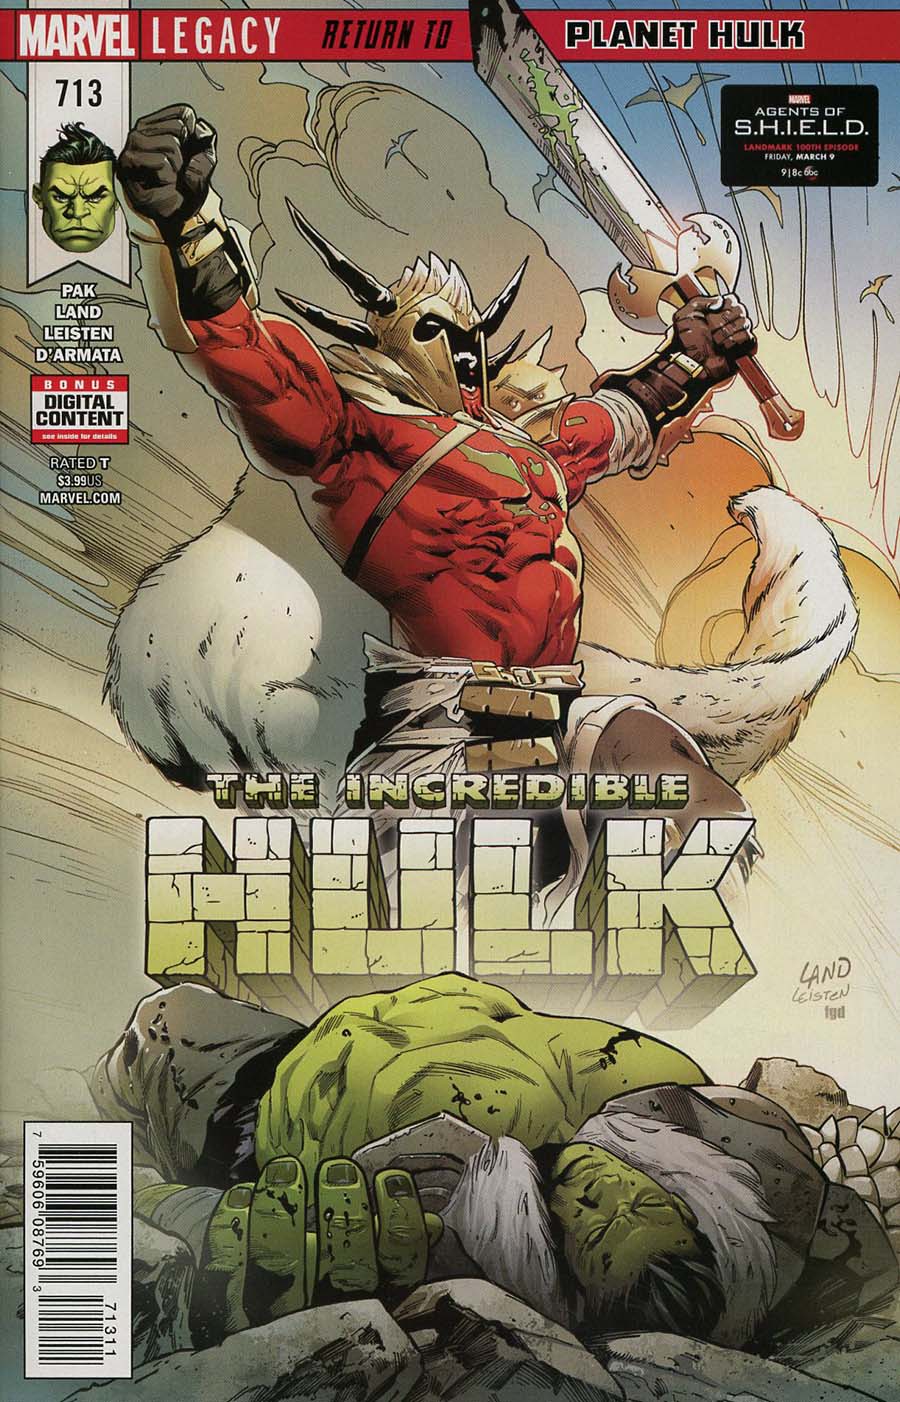 Incredible Hulk Vol 4 #713 Cover A Regular Greg Land Cover (Marvel Legacy Tie-In)